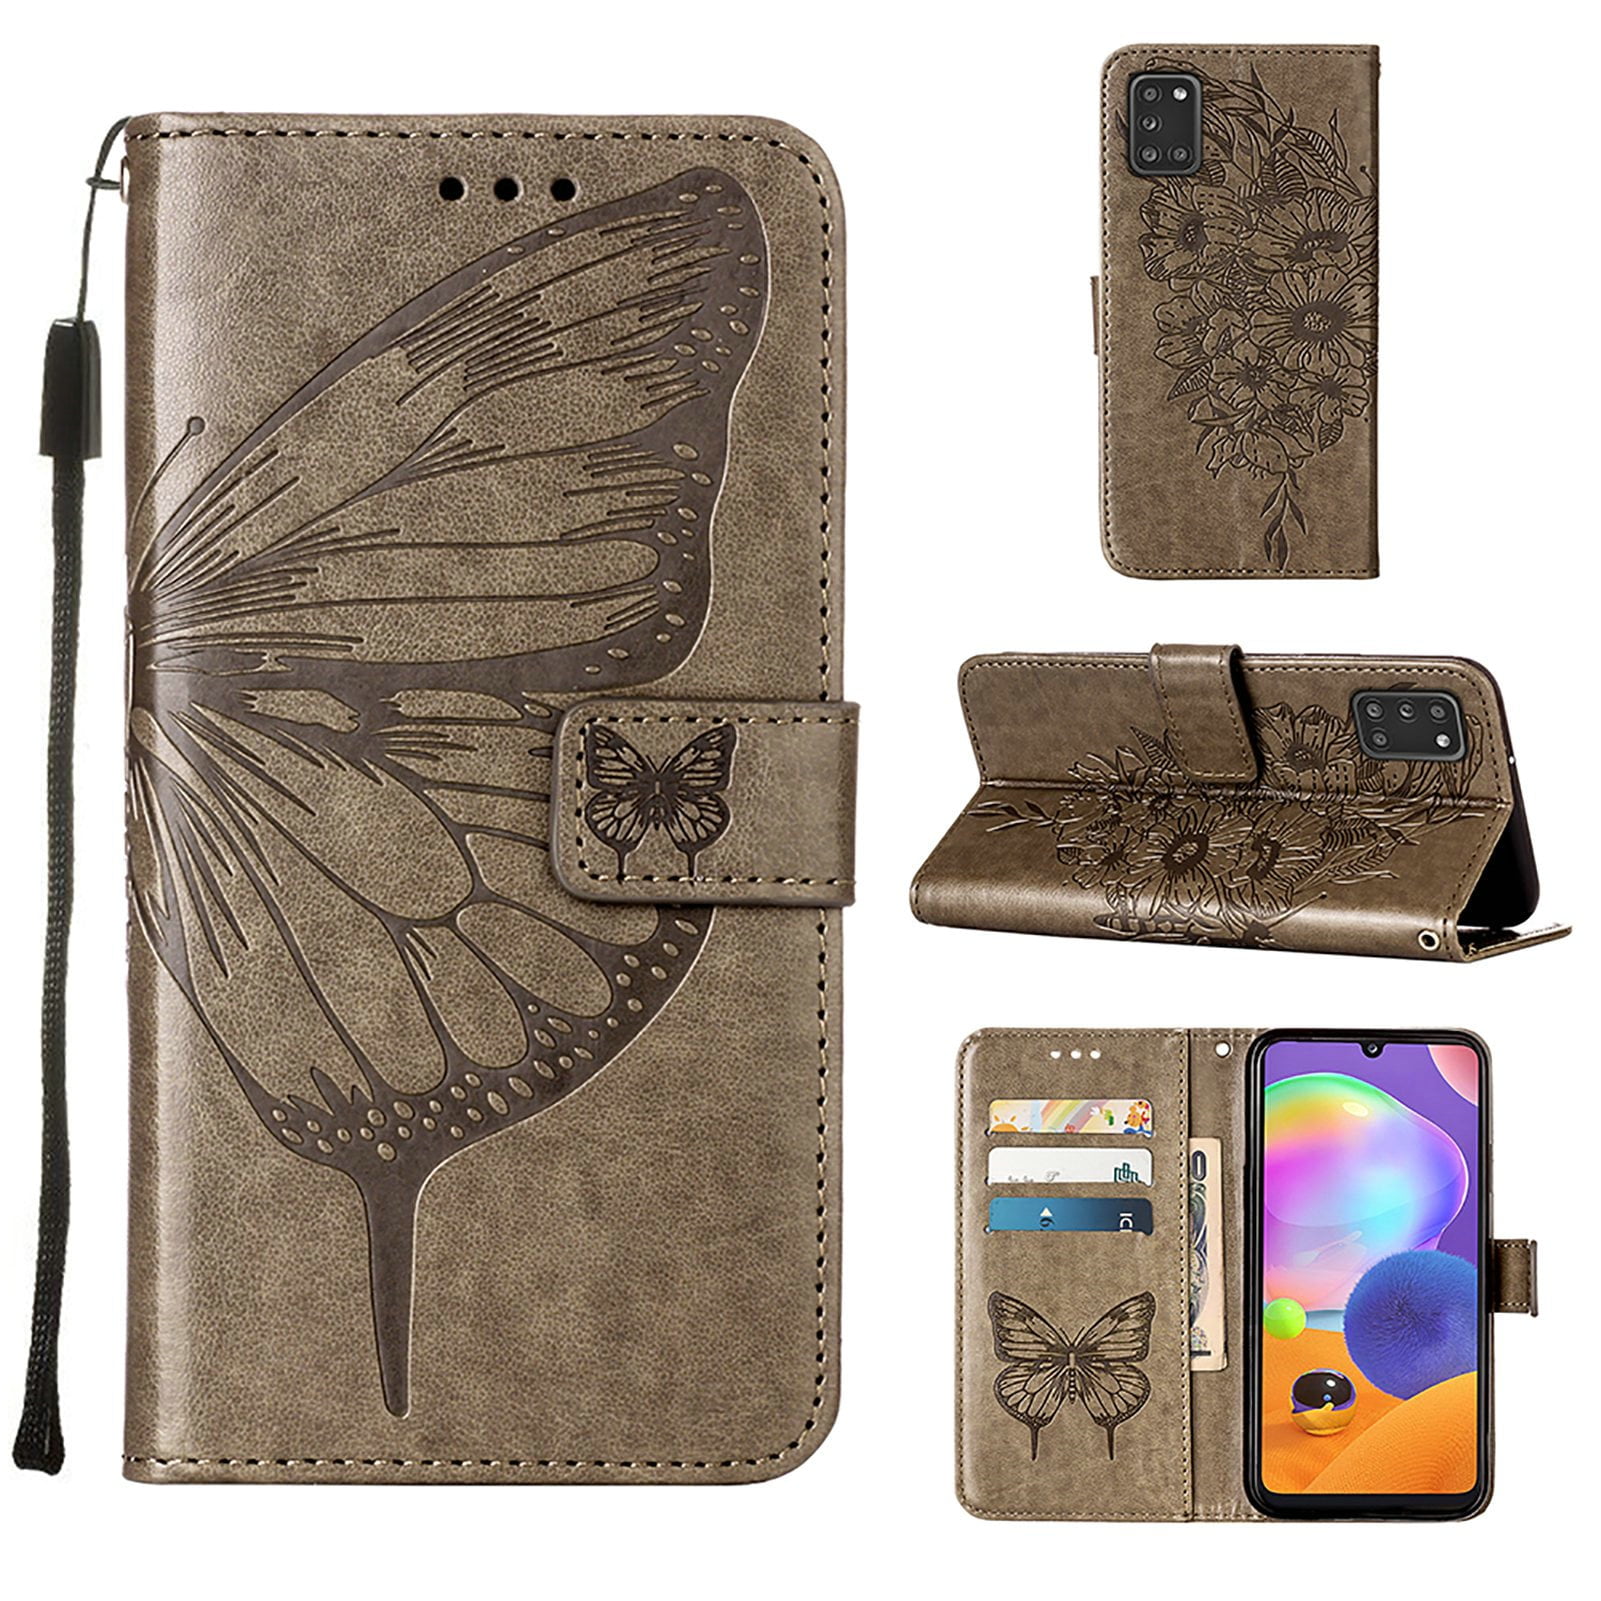 Samsung Galaxy A71 Case PU Leather Shockproof Notebook Wallet Butterfly Phone Case with Kickstand Card Slots Magnetic Soft TPU Bumper Flip Folio Protective Cover for Samsung Galaxy A71 black